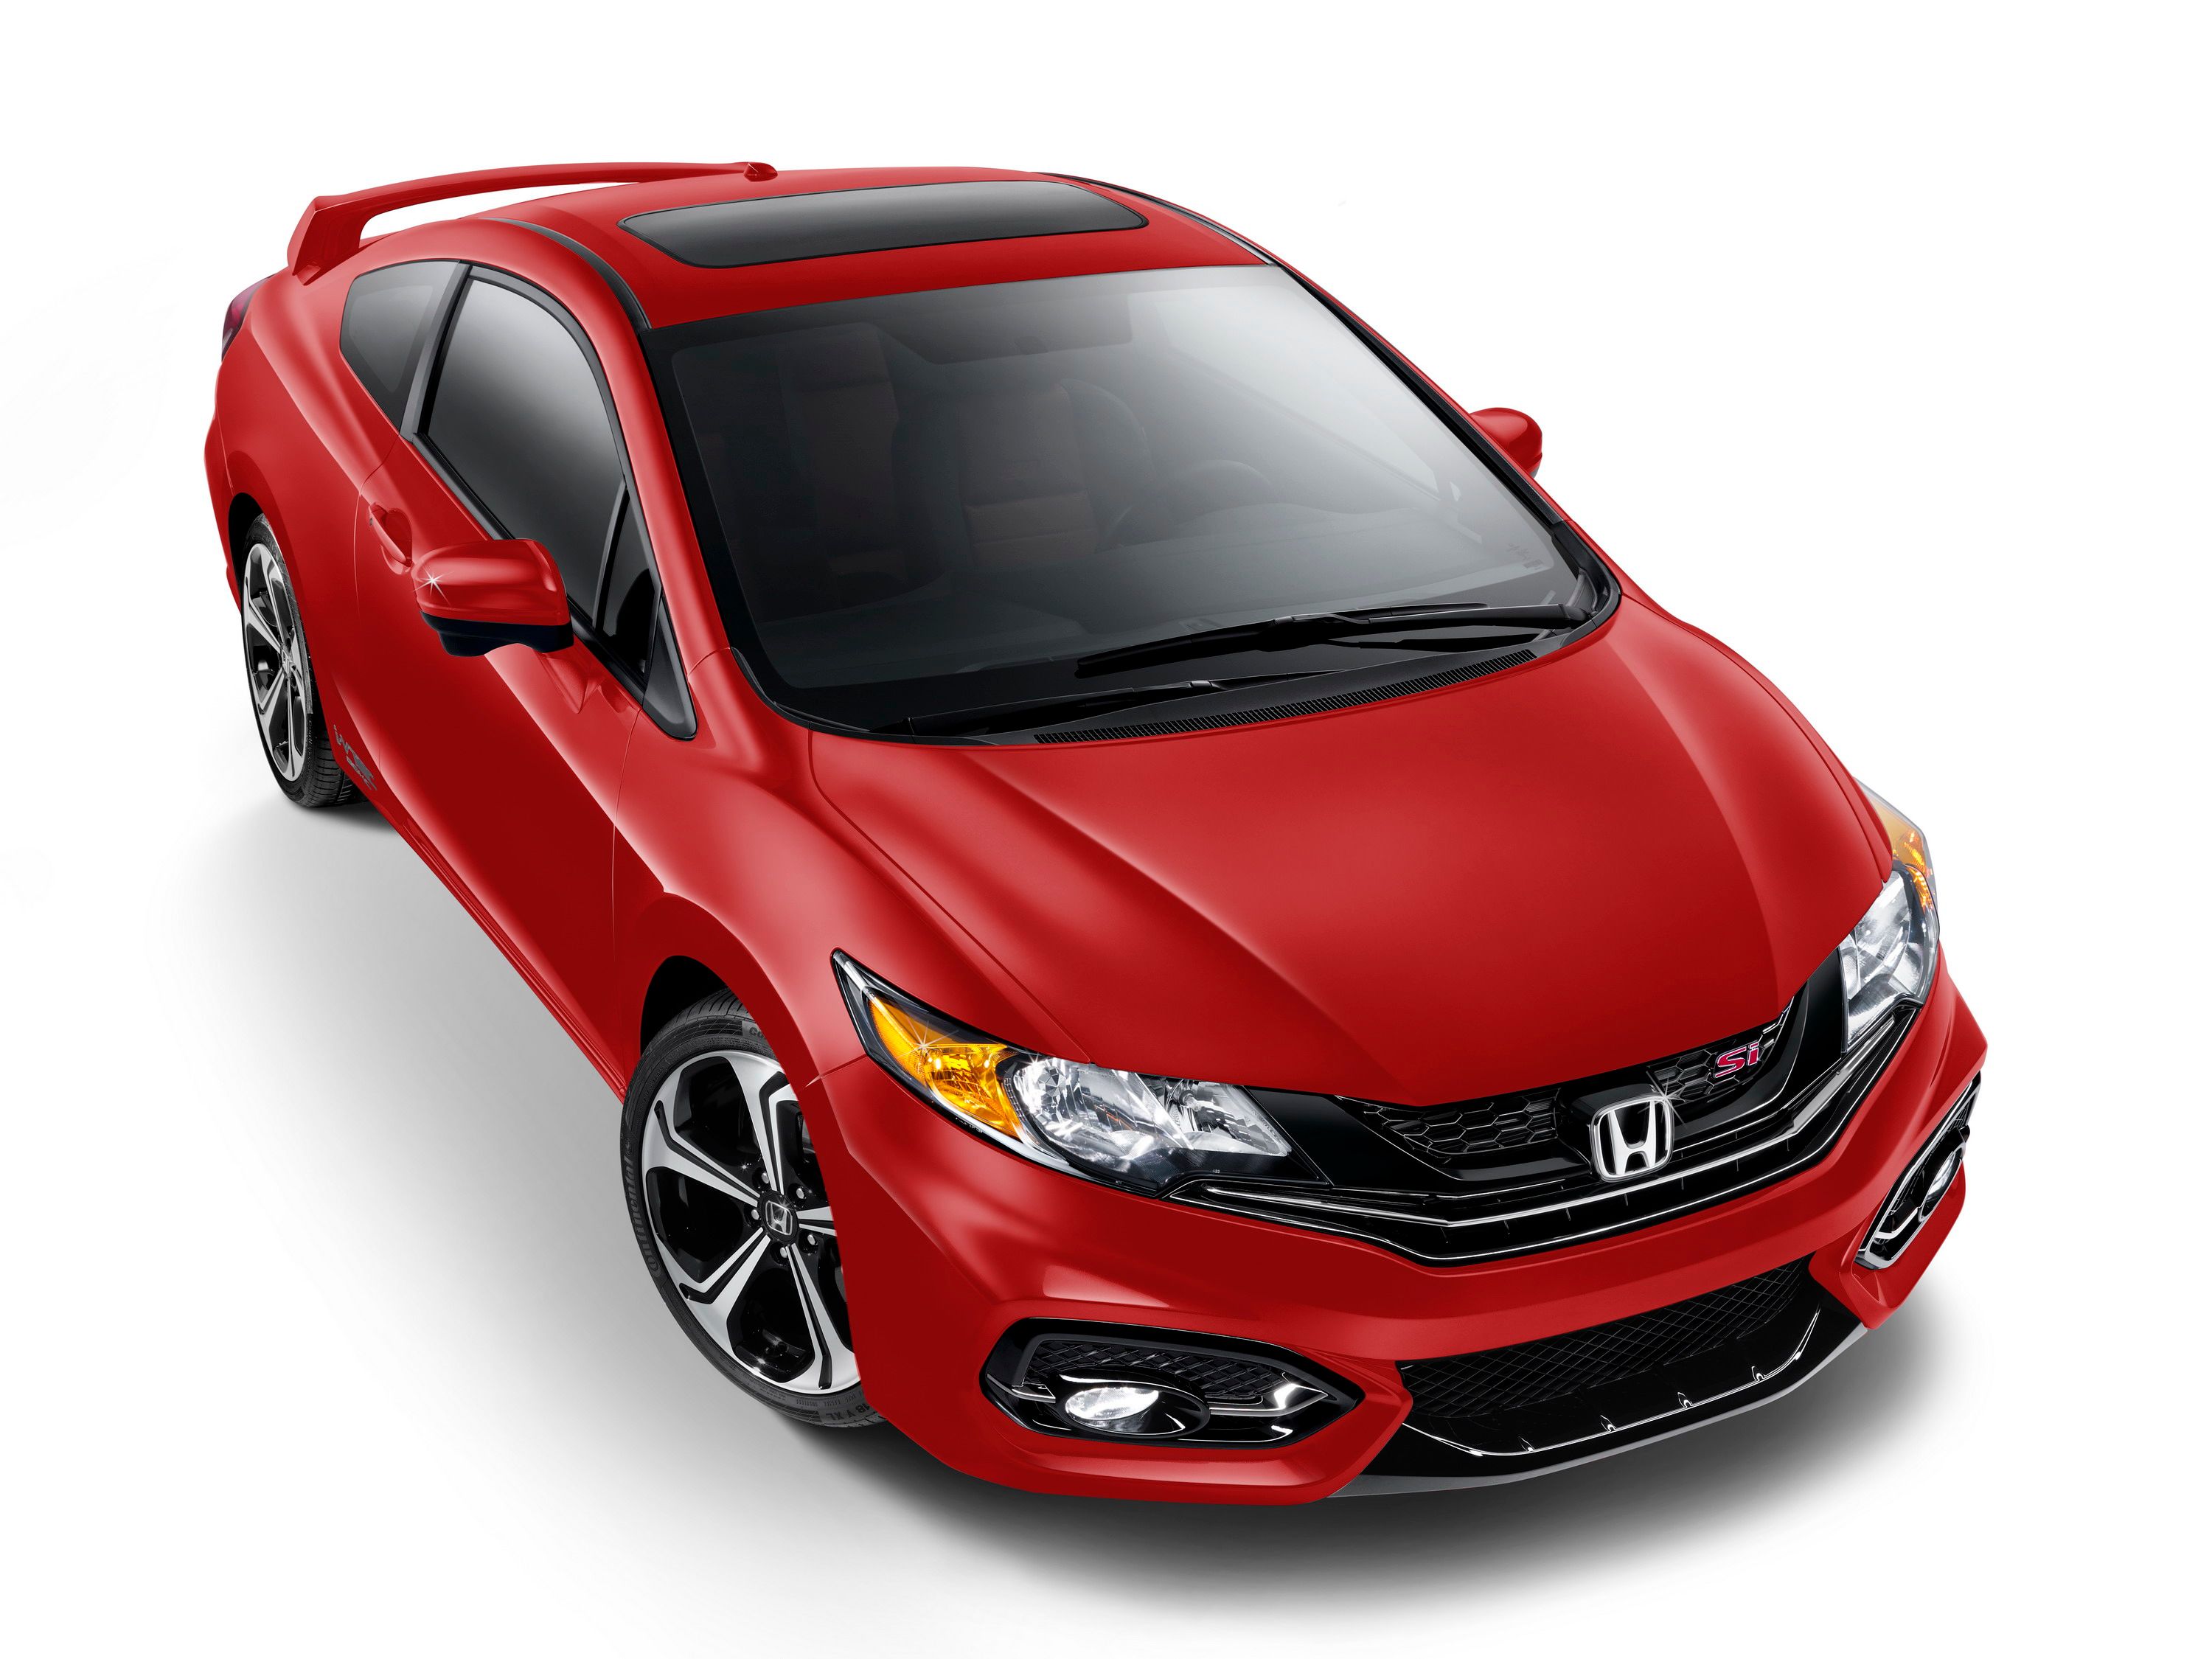 2017 Honda to Debut the New Civic Si at the L.A. Auto Show